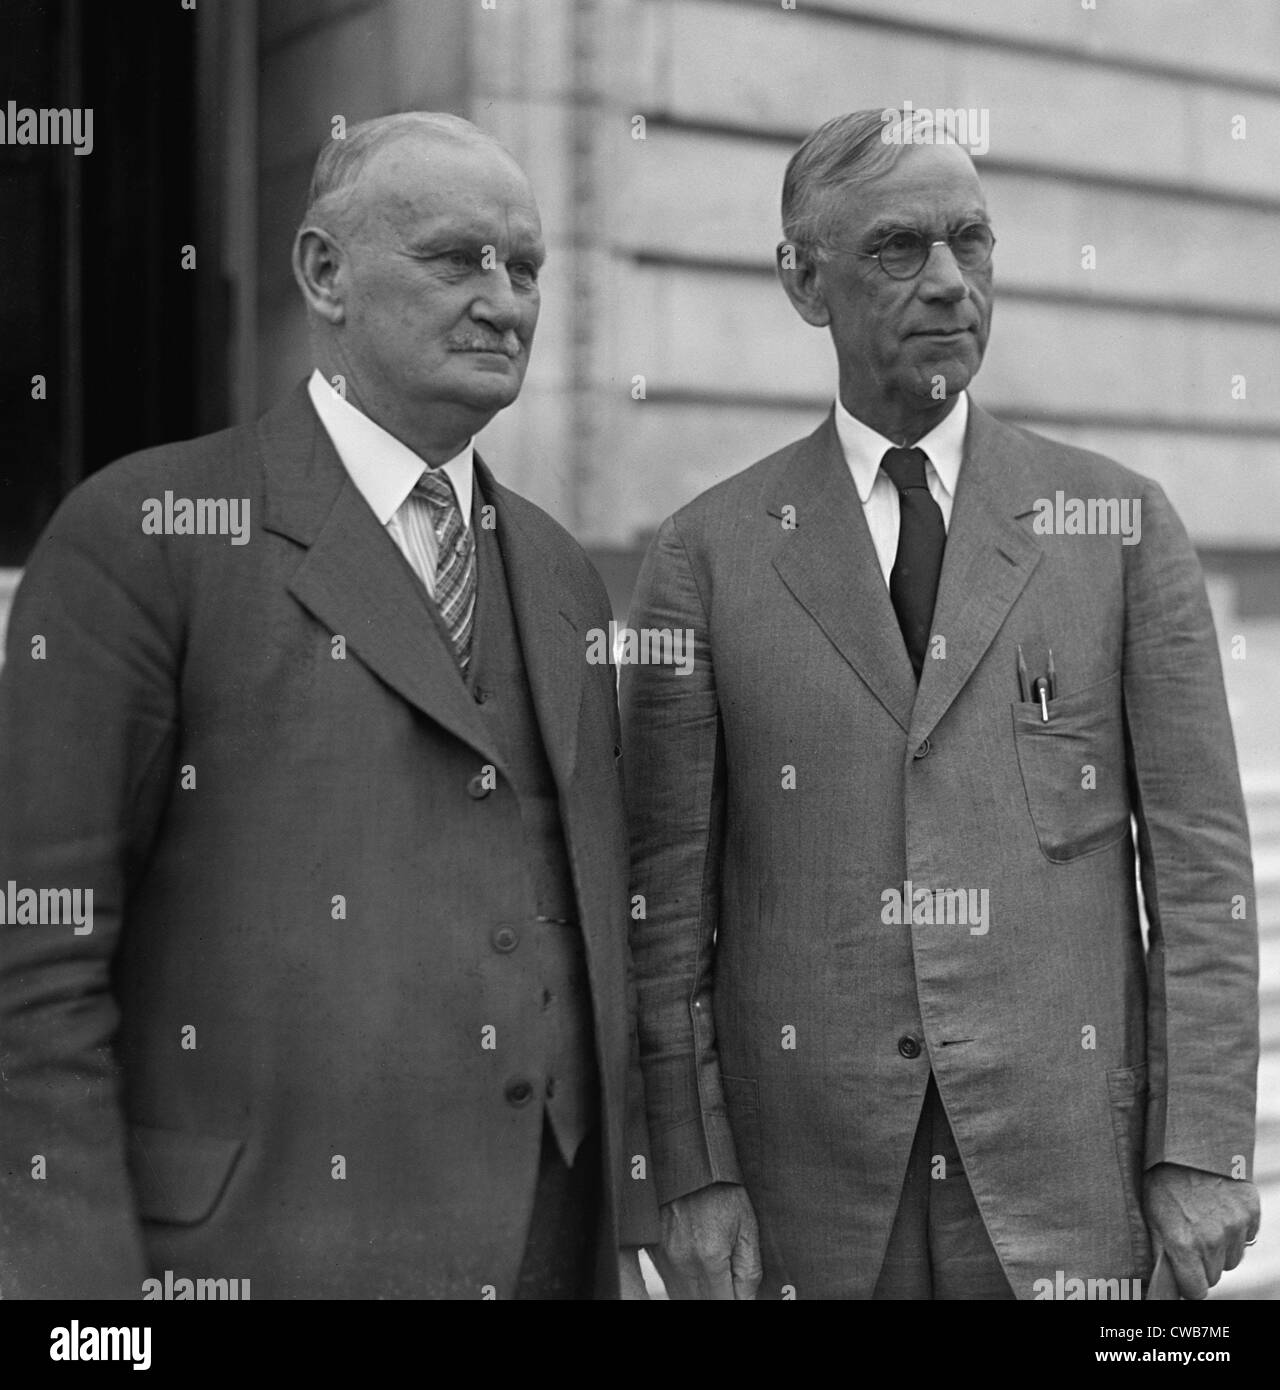 Willis C. Hawley and Reed Smoot, co-sponsors of the Smoot-Hawley Tarrif Act of 1930, c. 1929 Stock Photo